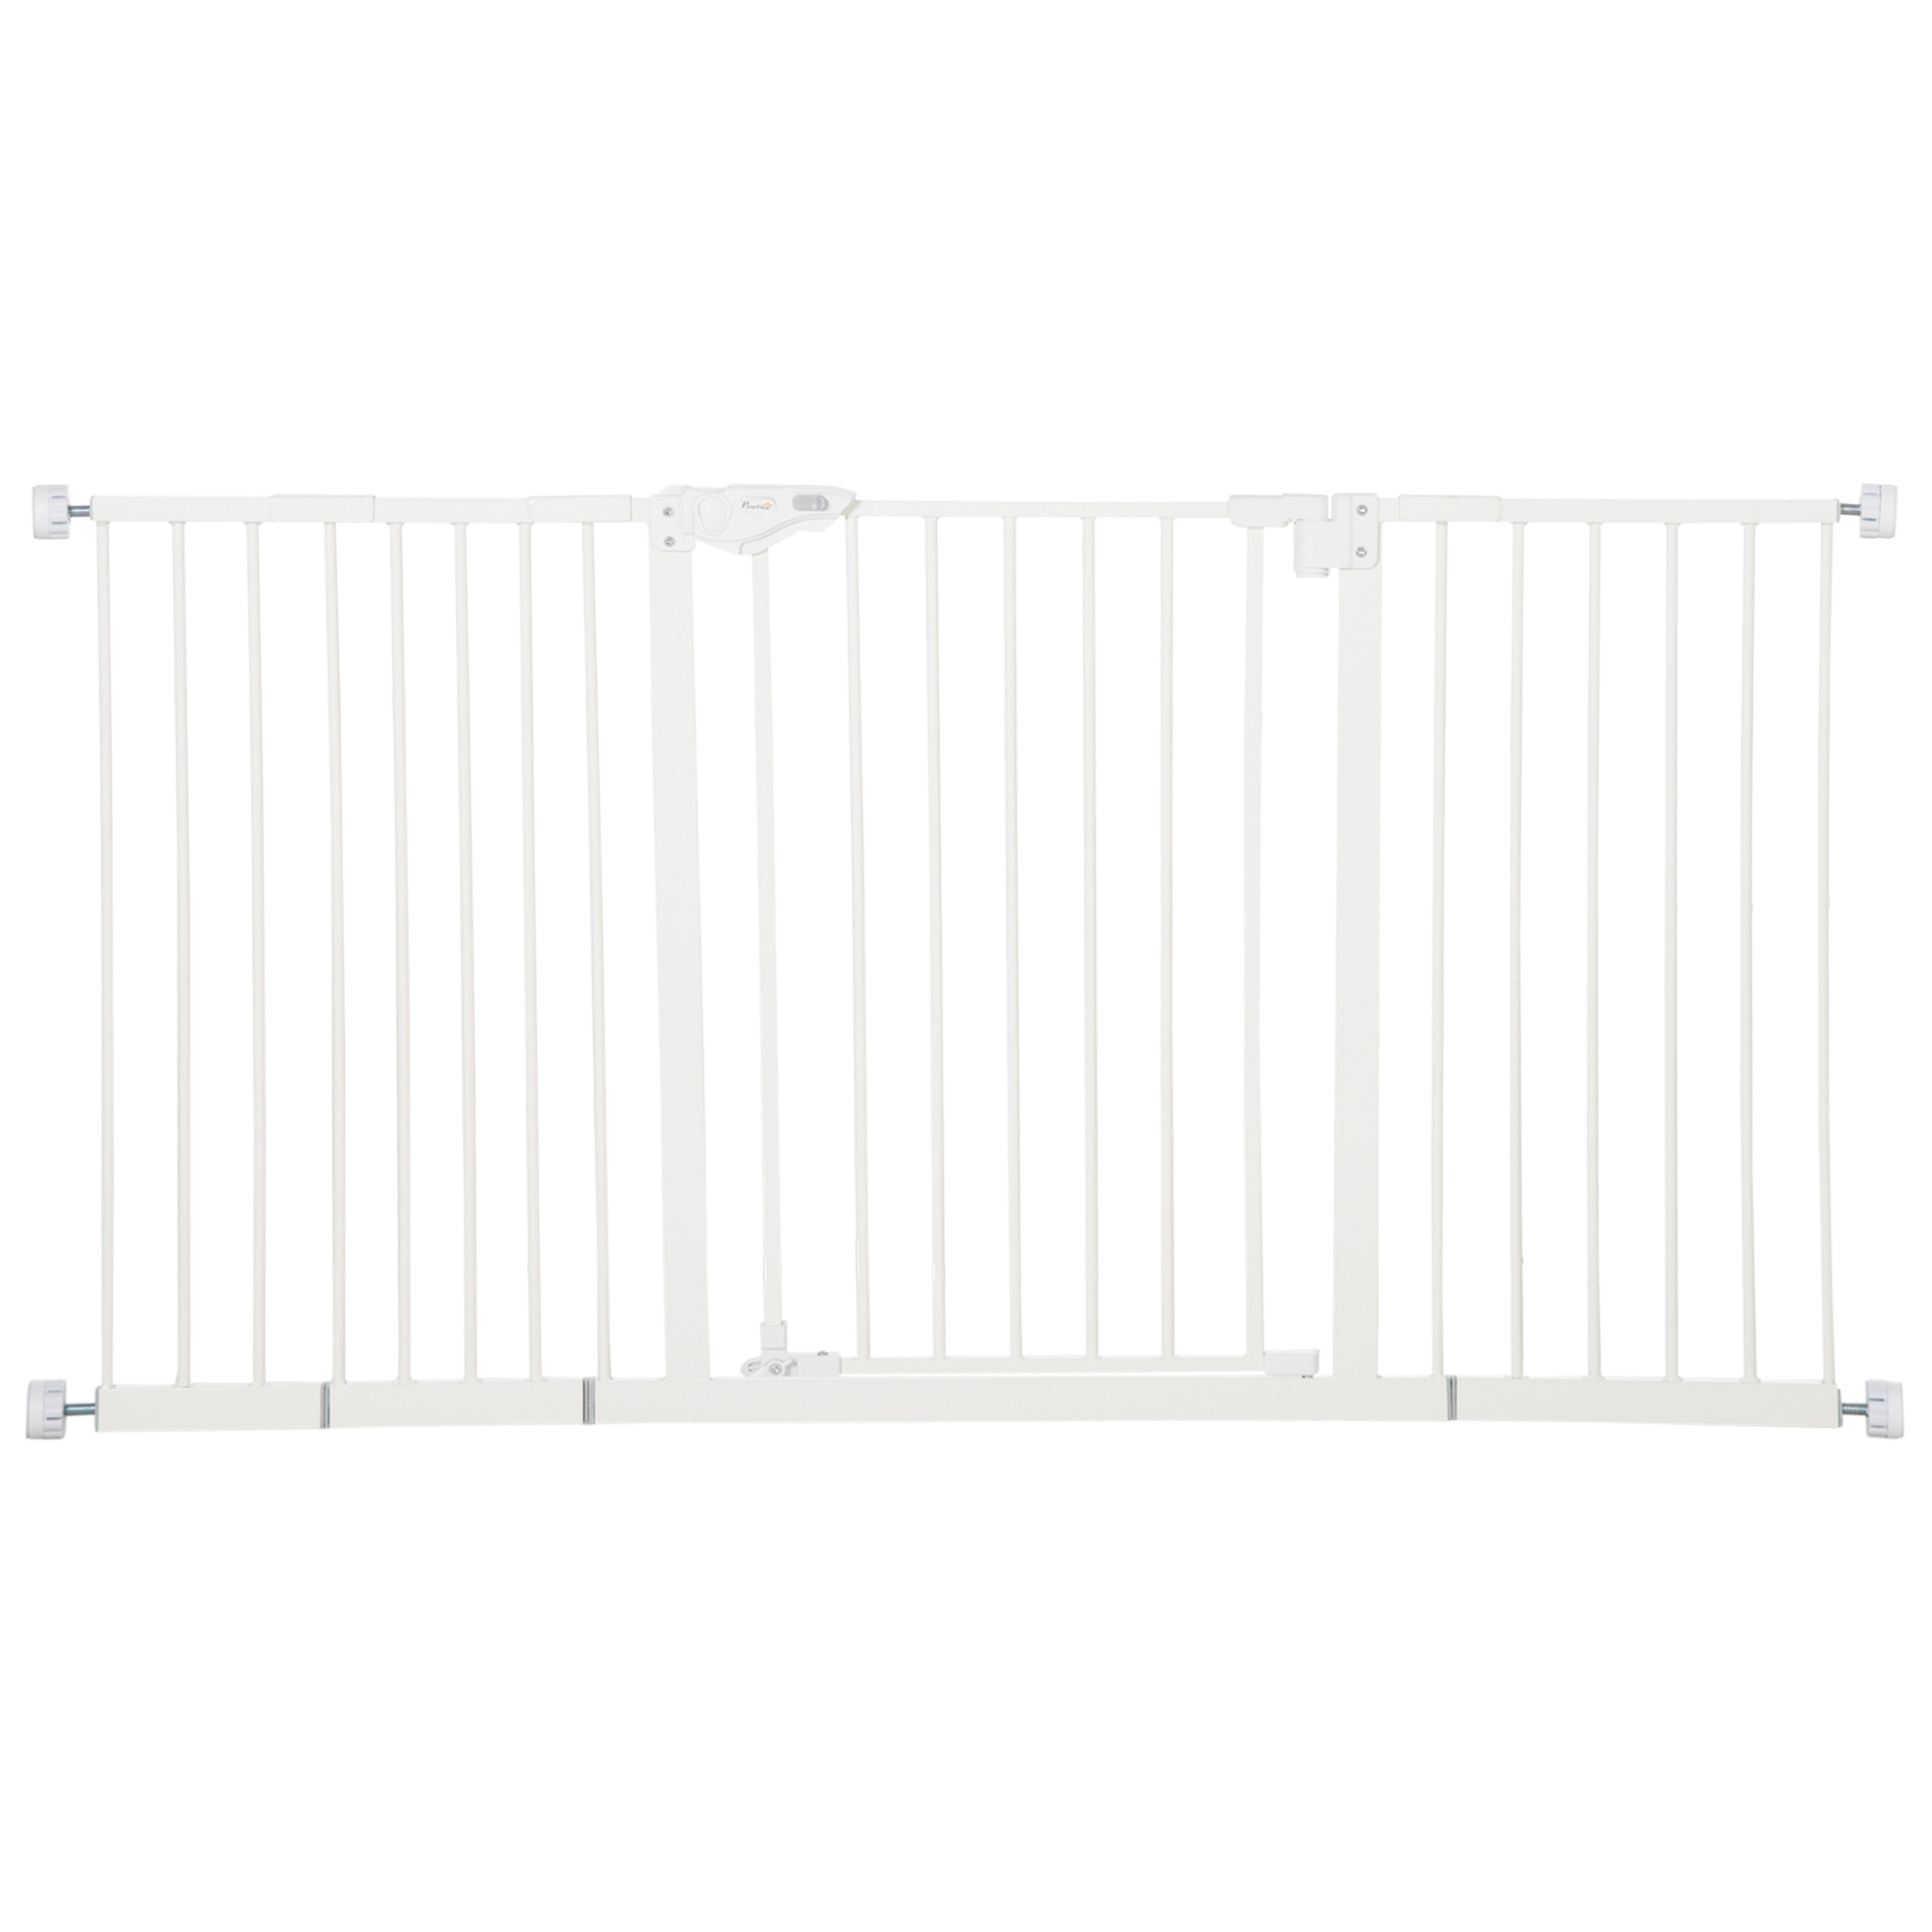 Pawhut Dog Gate Stair Gate Pressure Fit Pets Barrier Auto Close For Doorway Hallway, 74-148cm Wide Adjustable, White